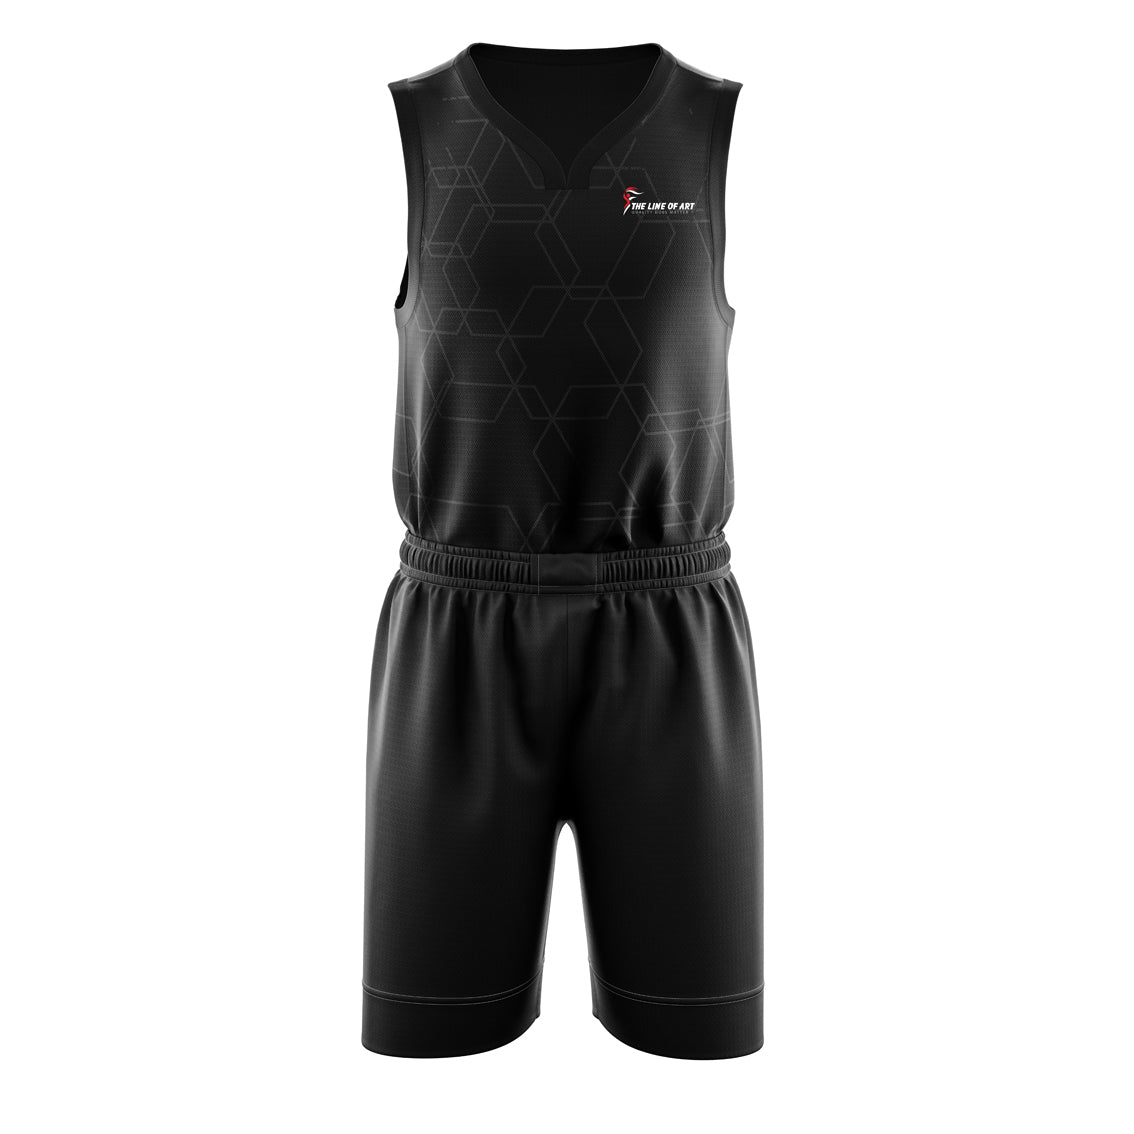 Customized Basketball Uniforms - Gear Up for Victory in Style! | Customized Soprtswear Uniforms